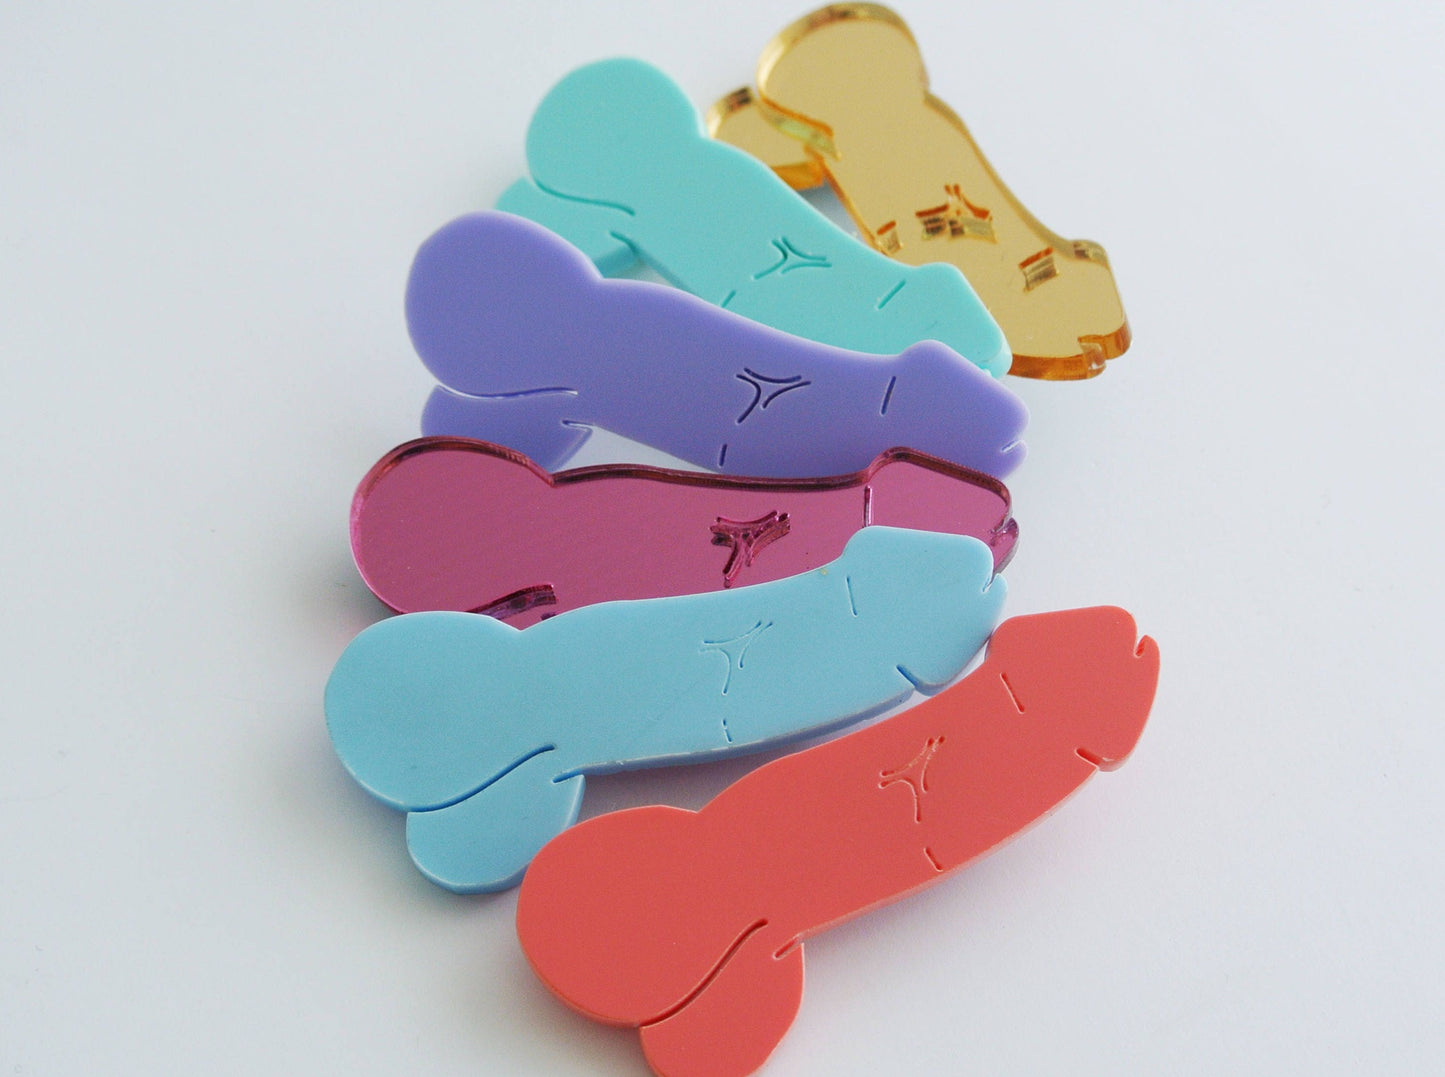 Dick brooch in 6 colours